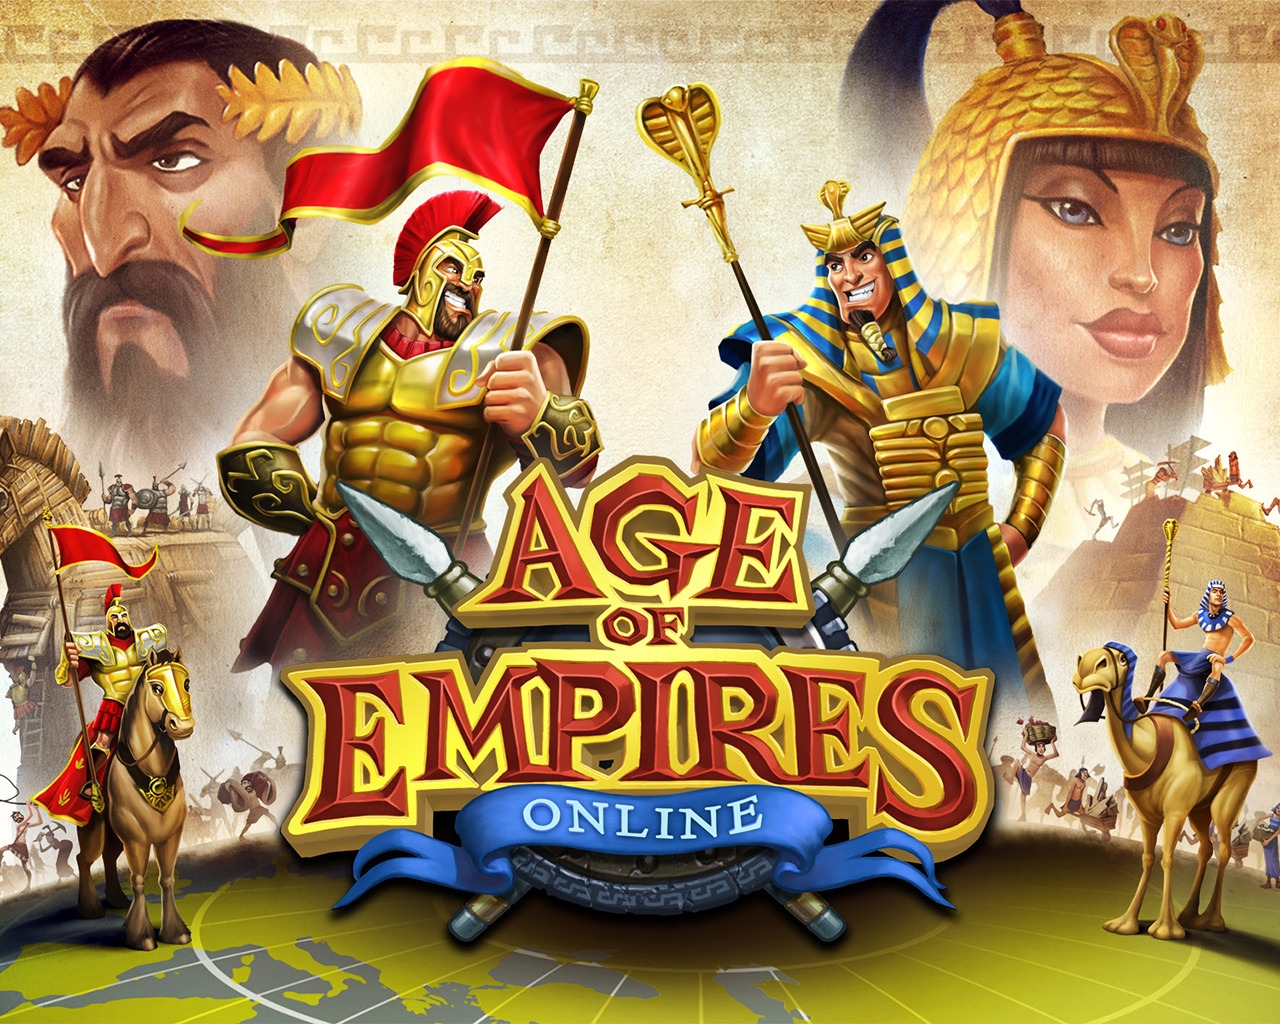 Age of Empires Online for 1280 x 1024 resolution